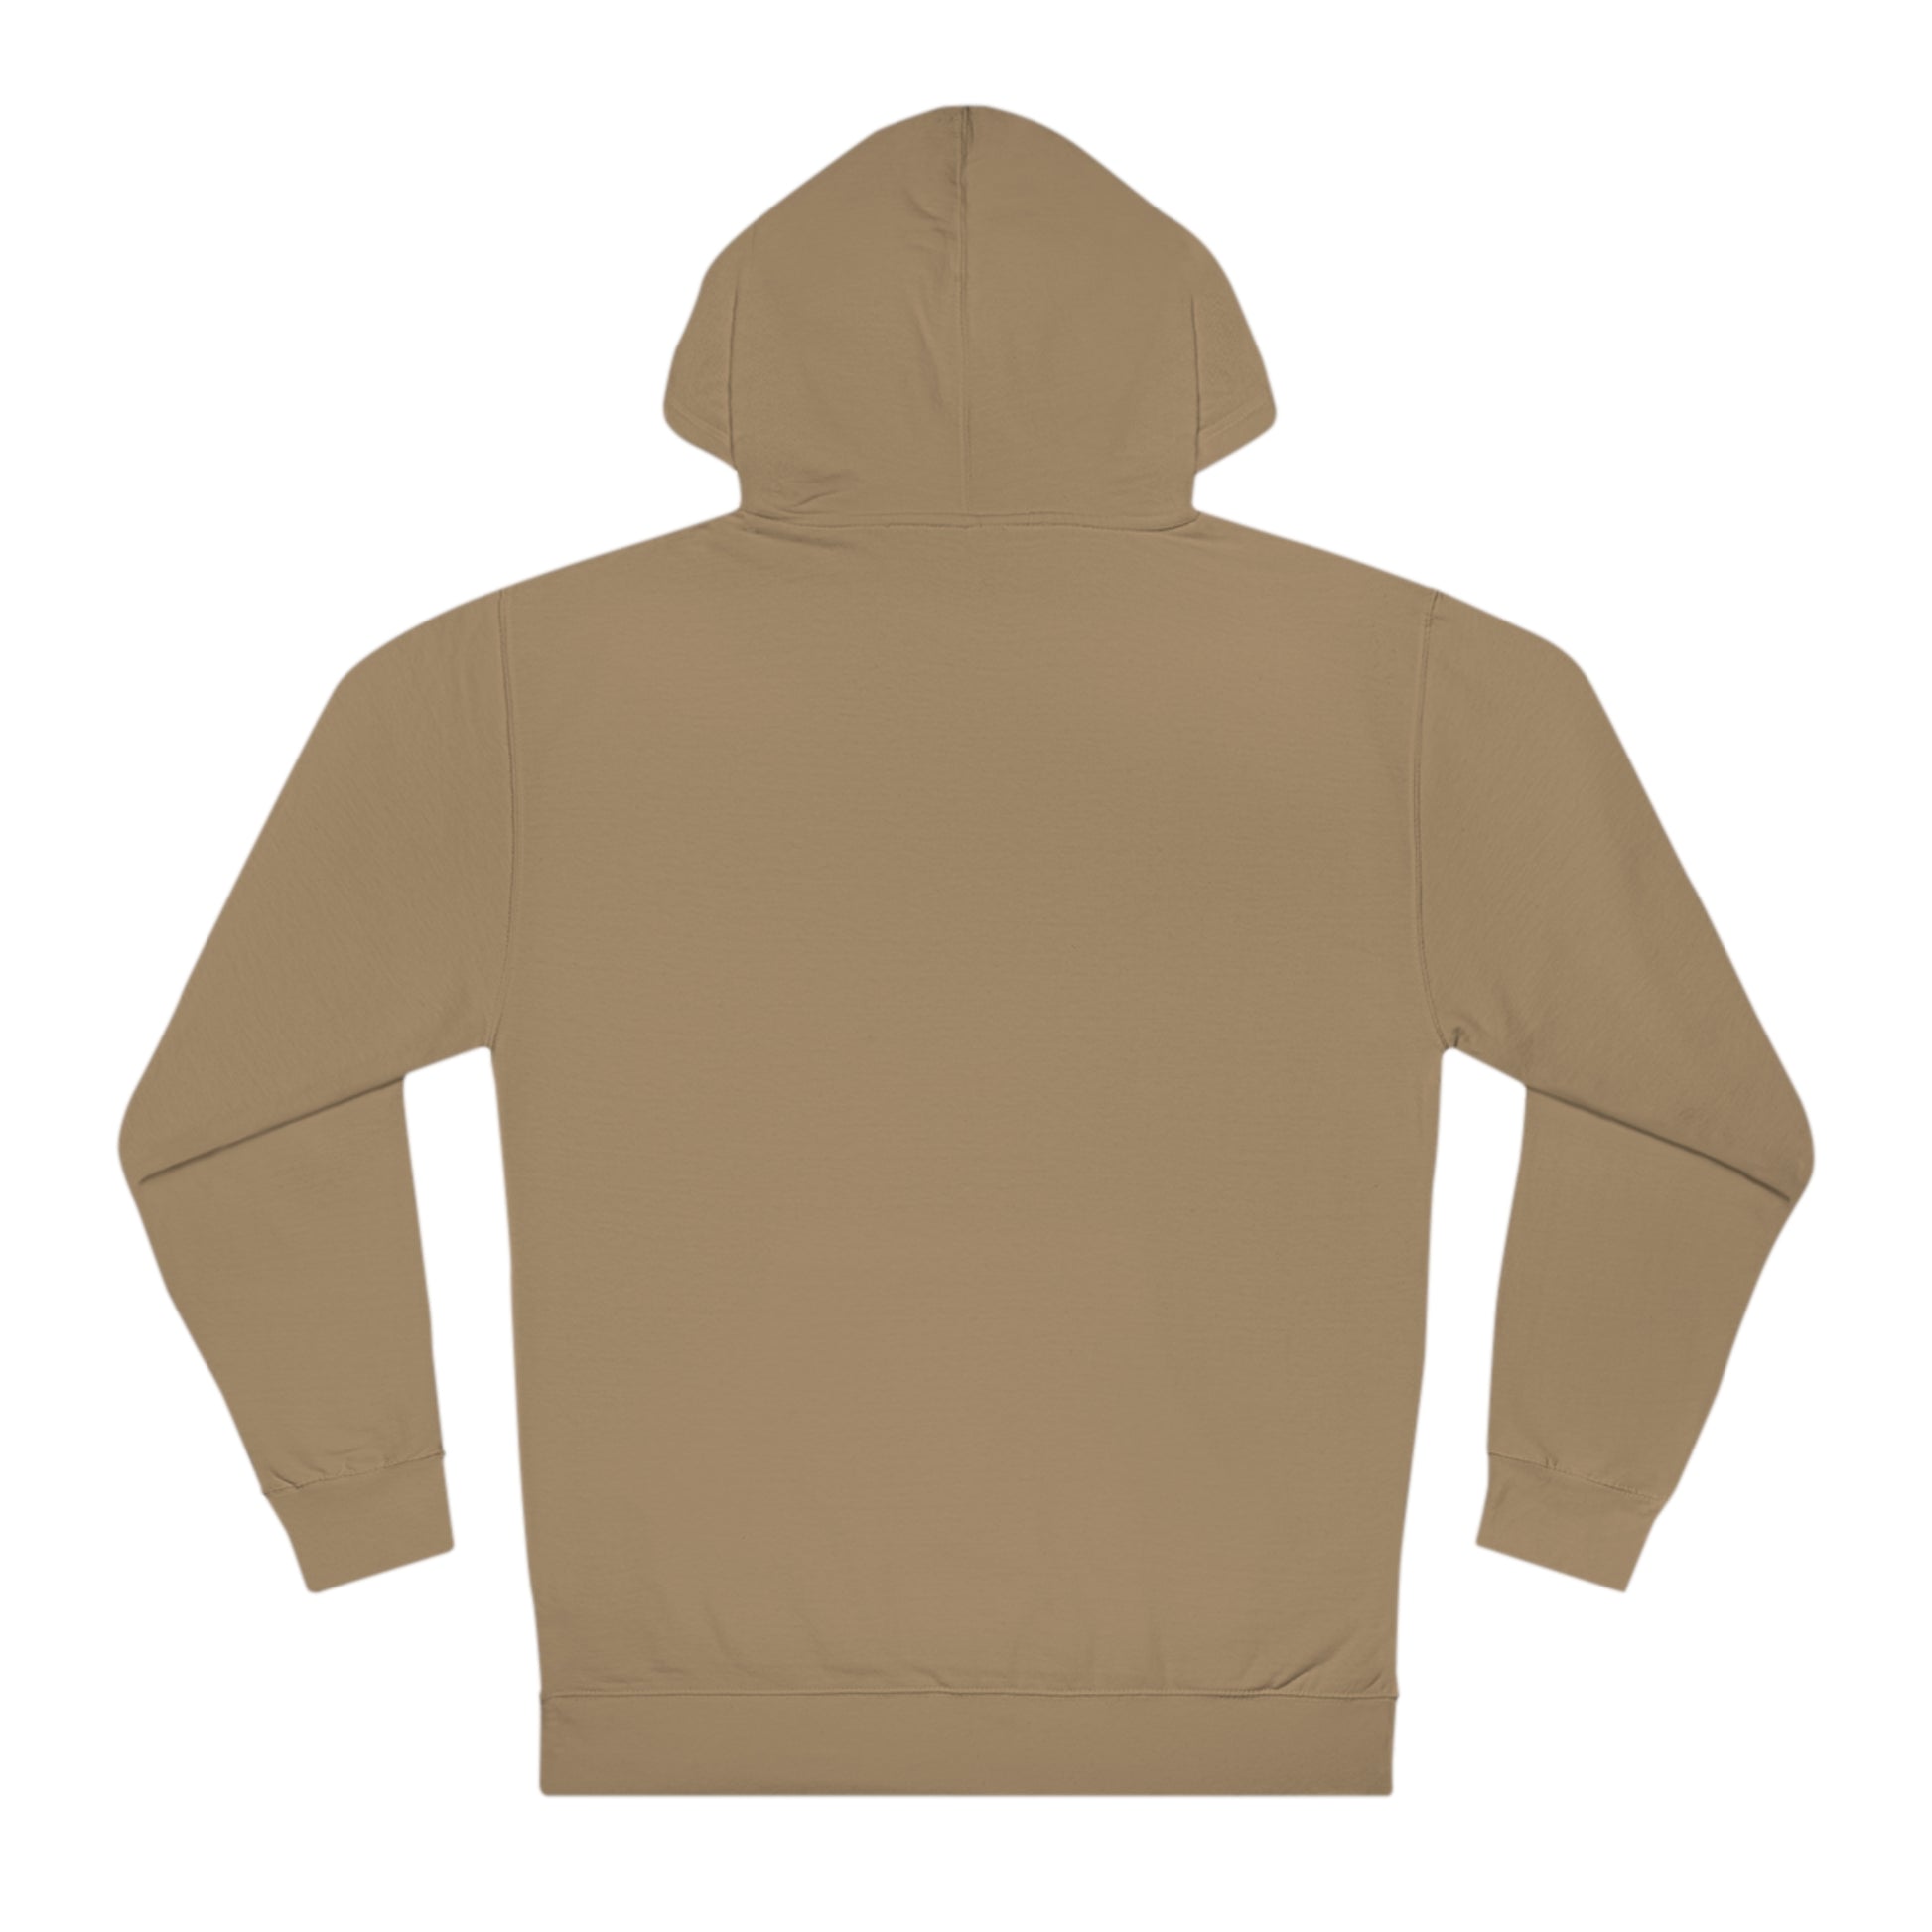 Warm and stylish hoodie for men and women